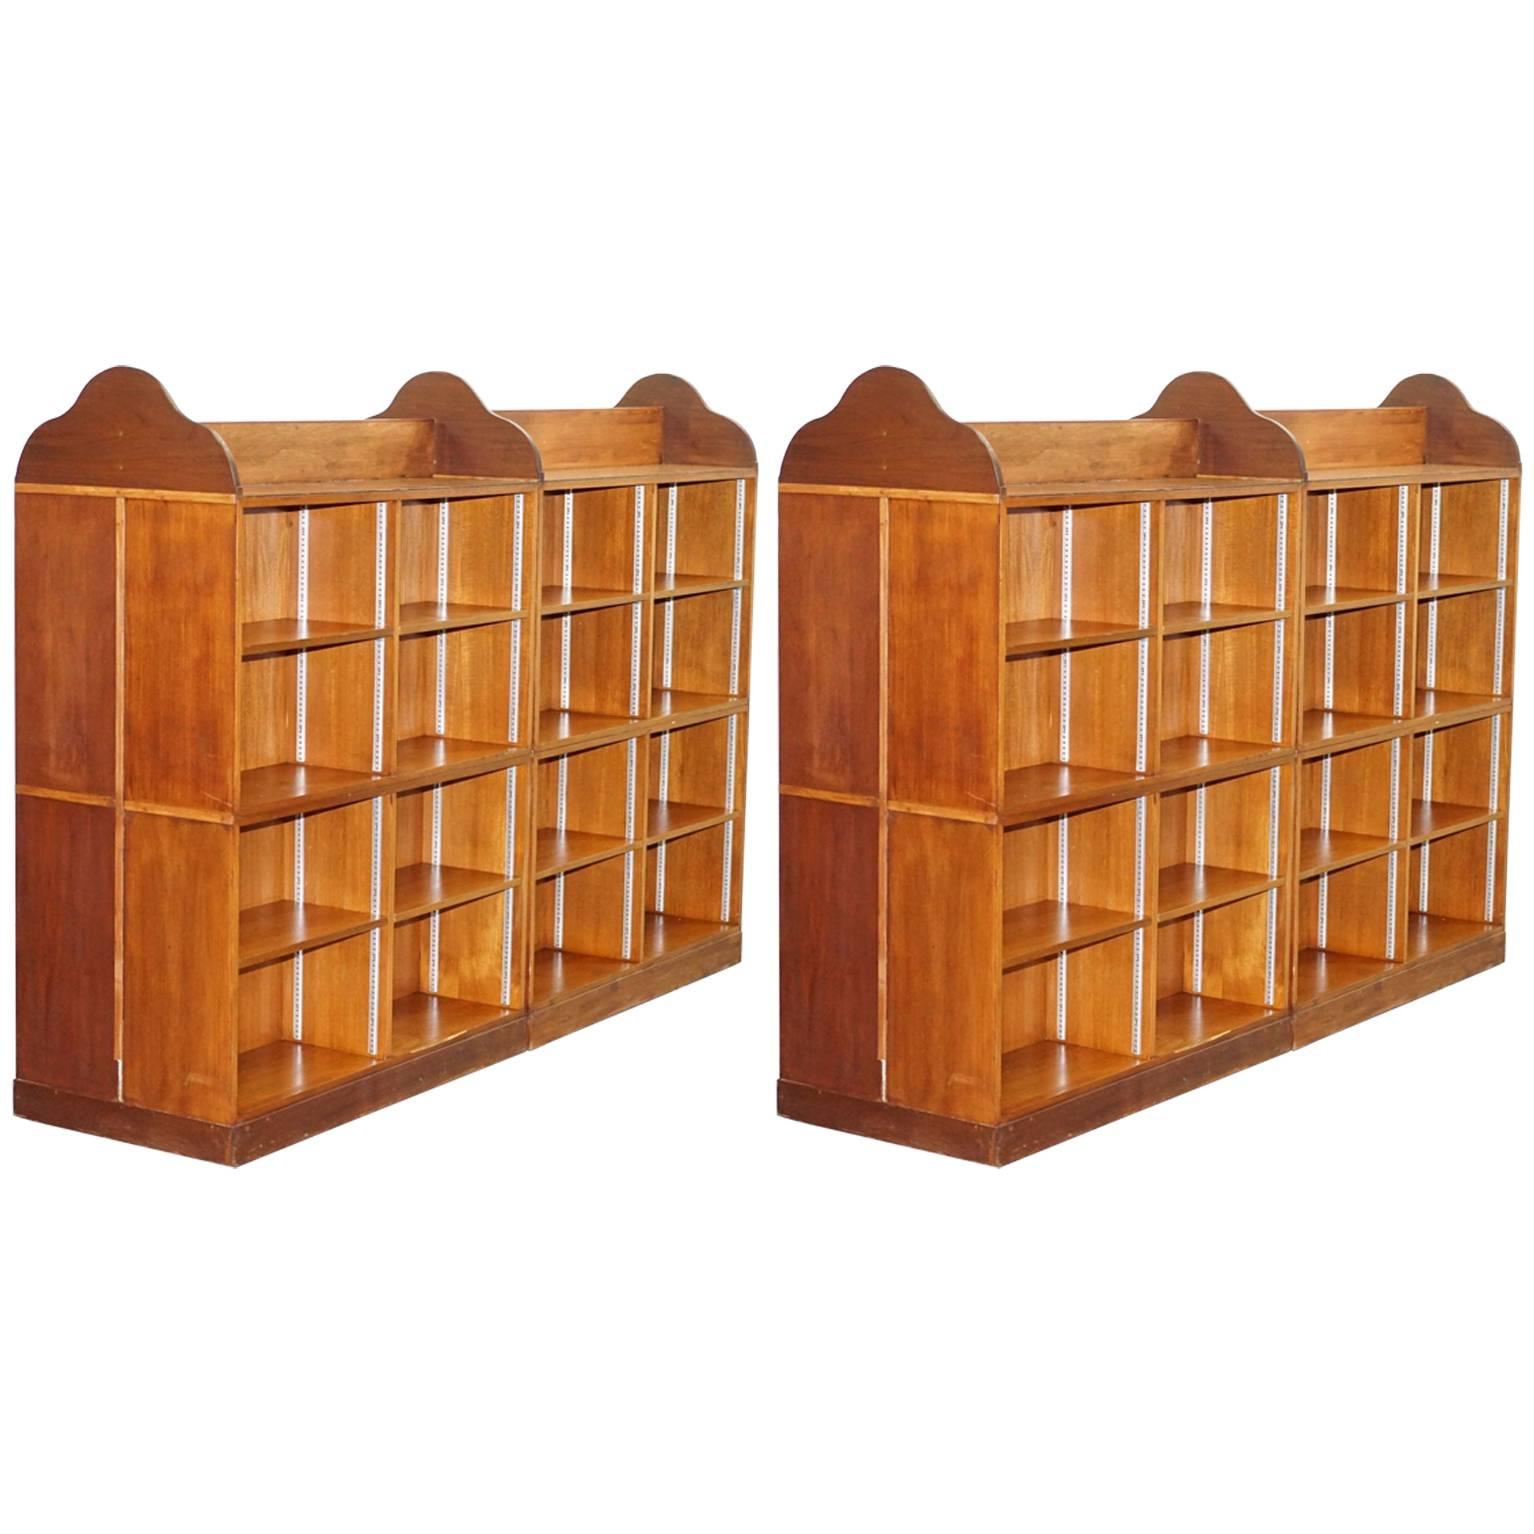 Matching Pair of Mahogany Double Sided Bookcases on Wheels Great Room Dividers